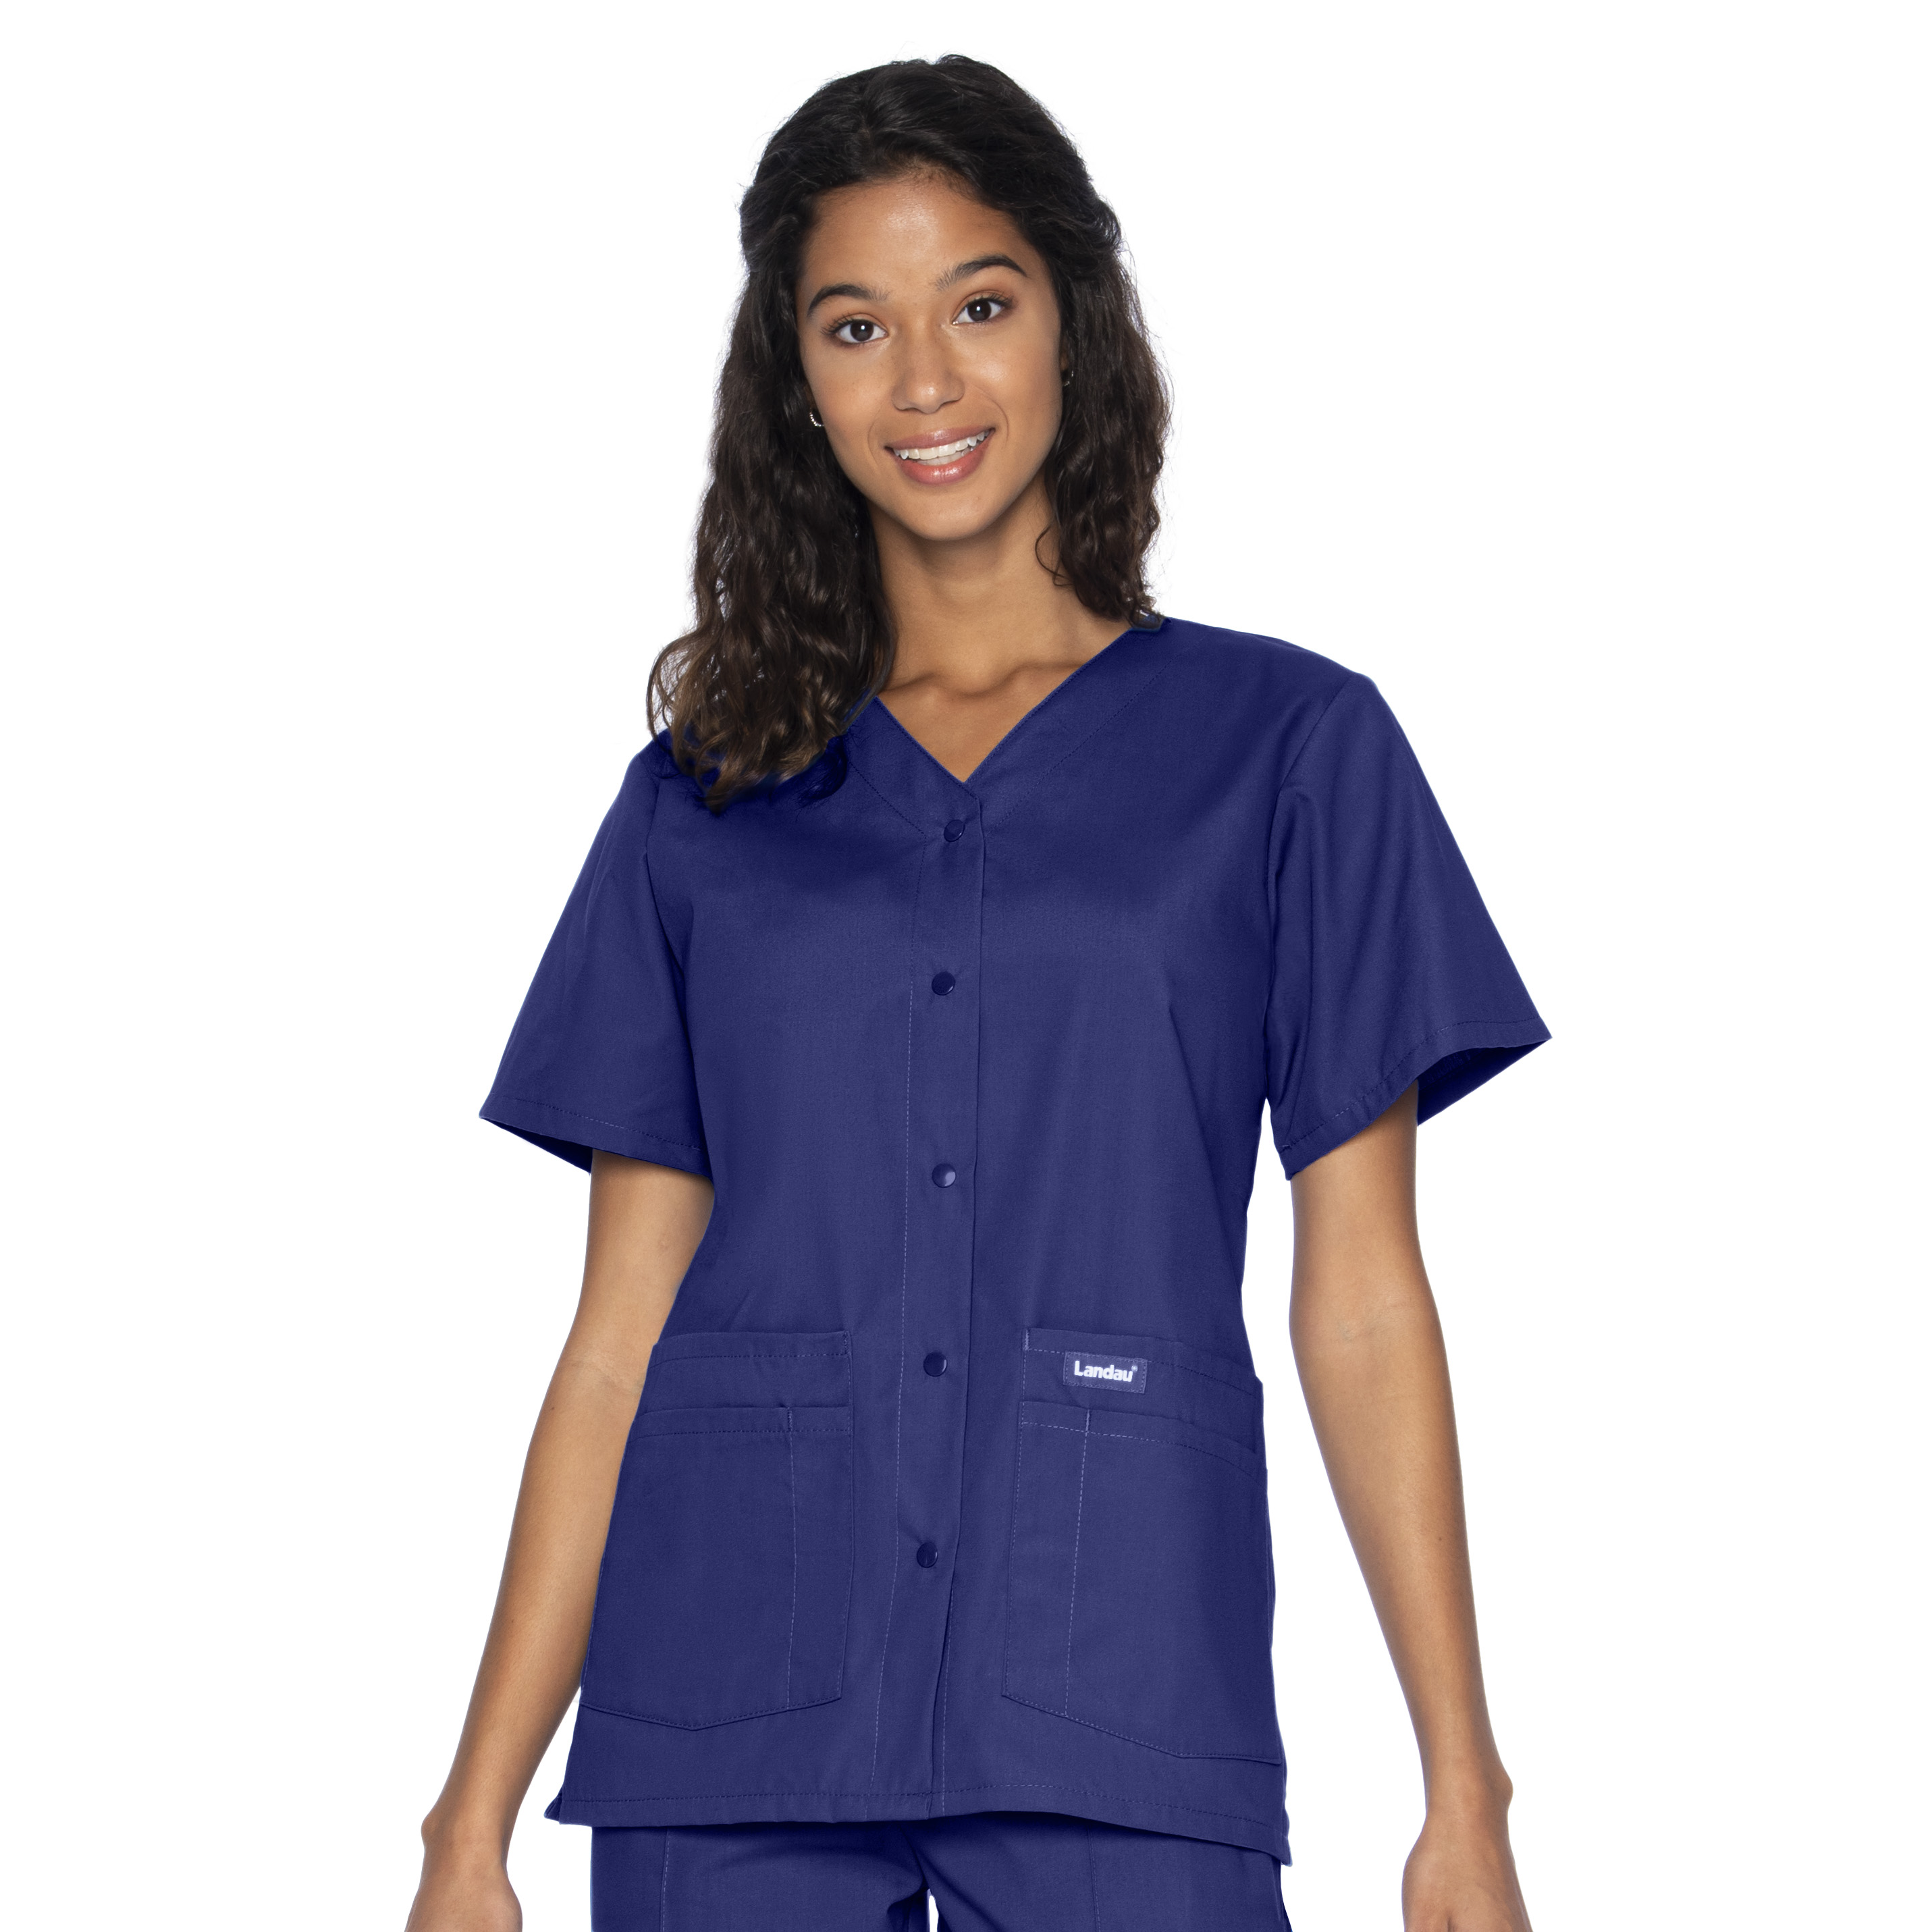 Is the material of the snap front Landau scrubs durable?